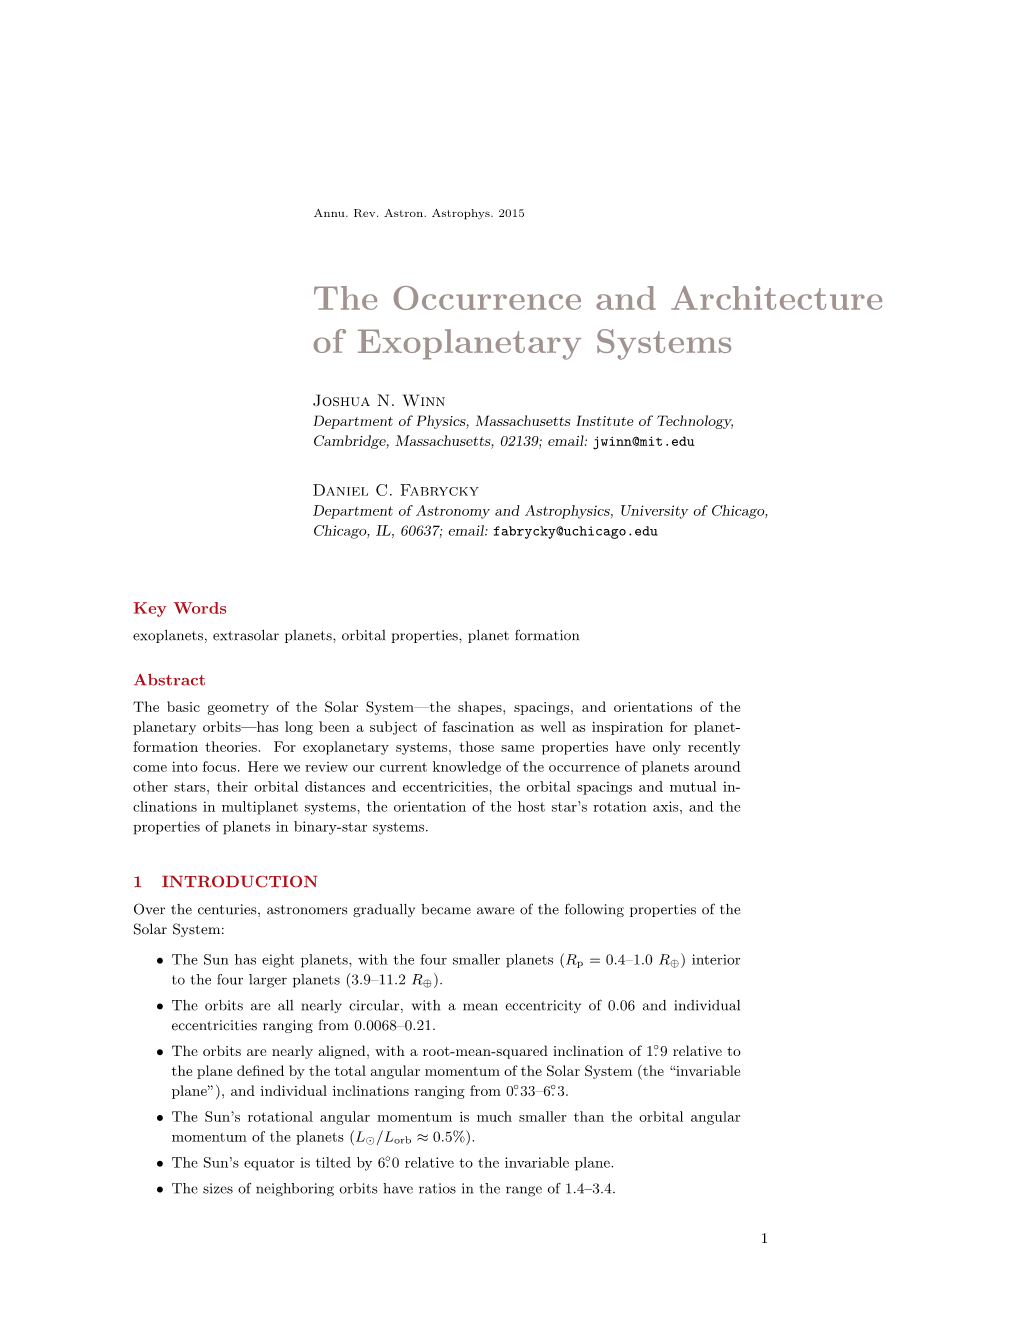 The Occurrence and Architecture of Exoplanetary Systems